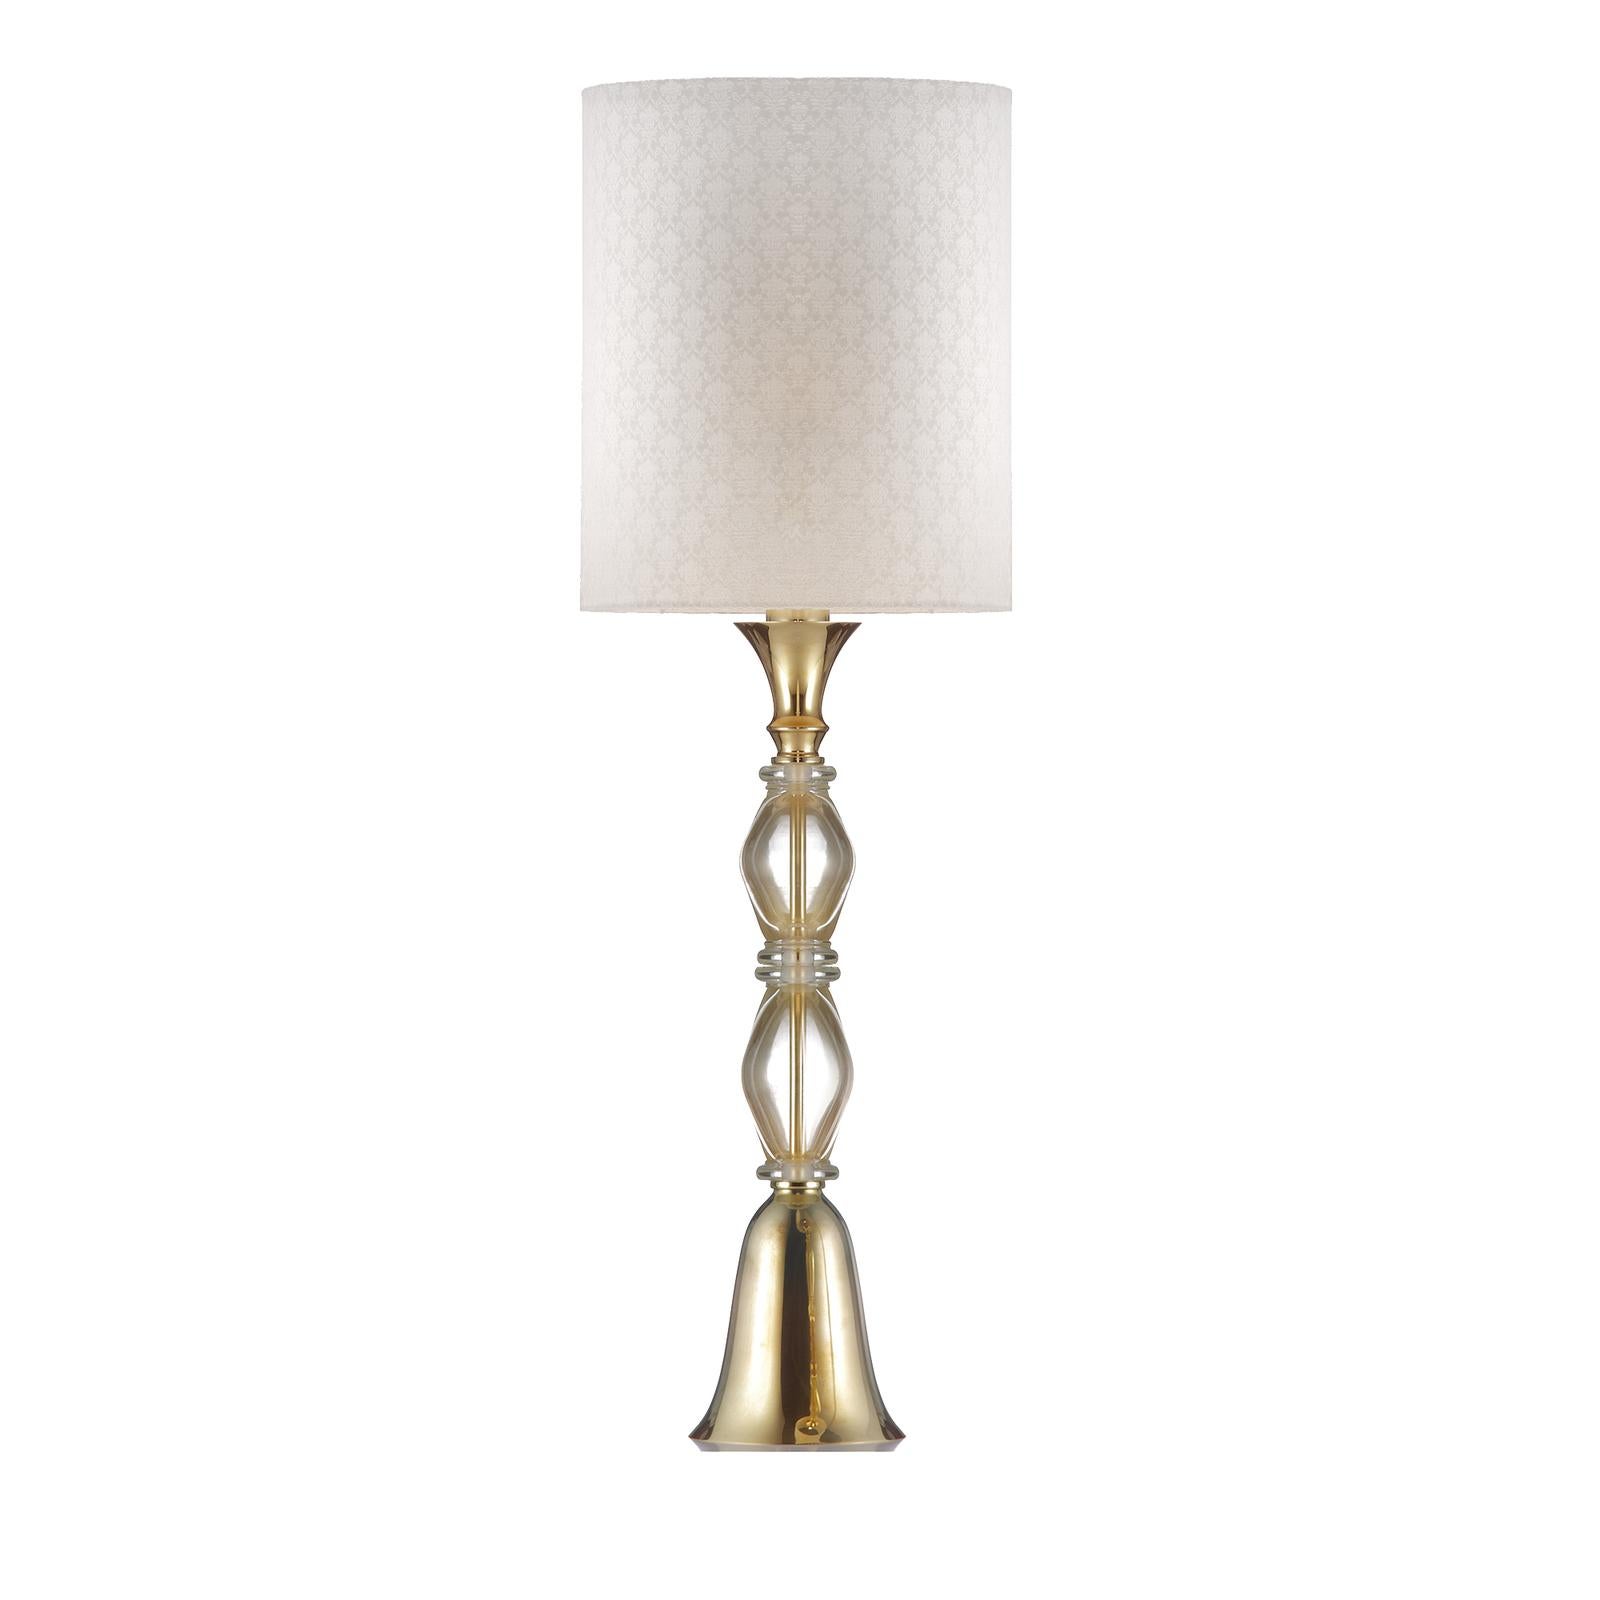 This exquisite table lamp flank two central elements in Murano glass with sinuous curves in metal with a polished gold finish. The effect is mesmerizing and will enrich with opulent sophistication a classic or modern interior, making a statement